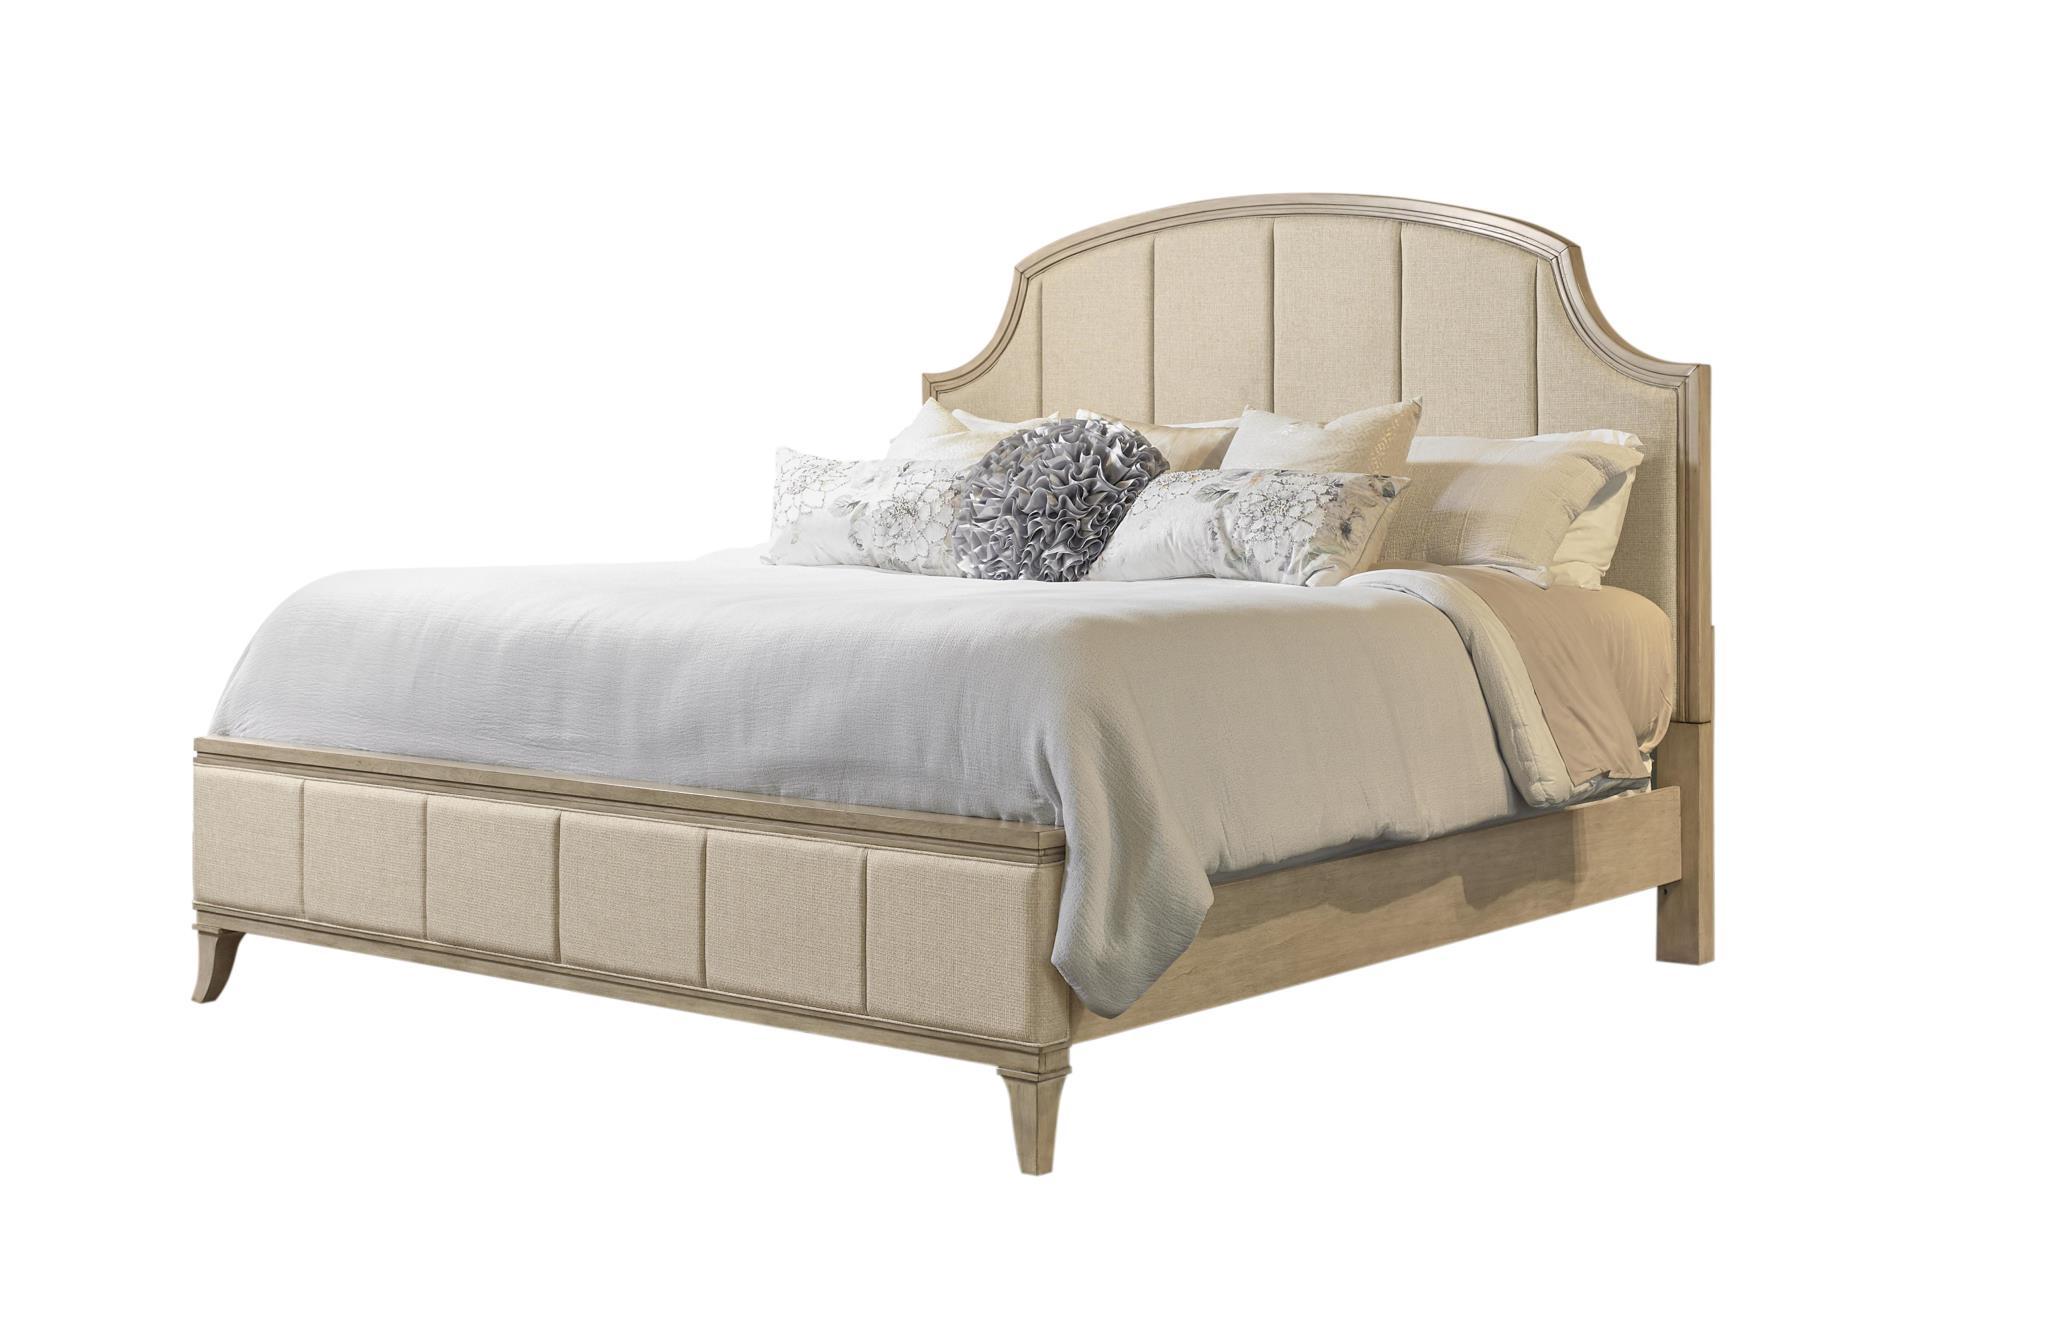 Contemporary, Modern Panel Bed VERONA 320-110 320-110 in Beige Fabric